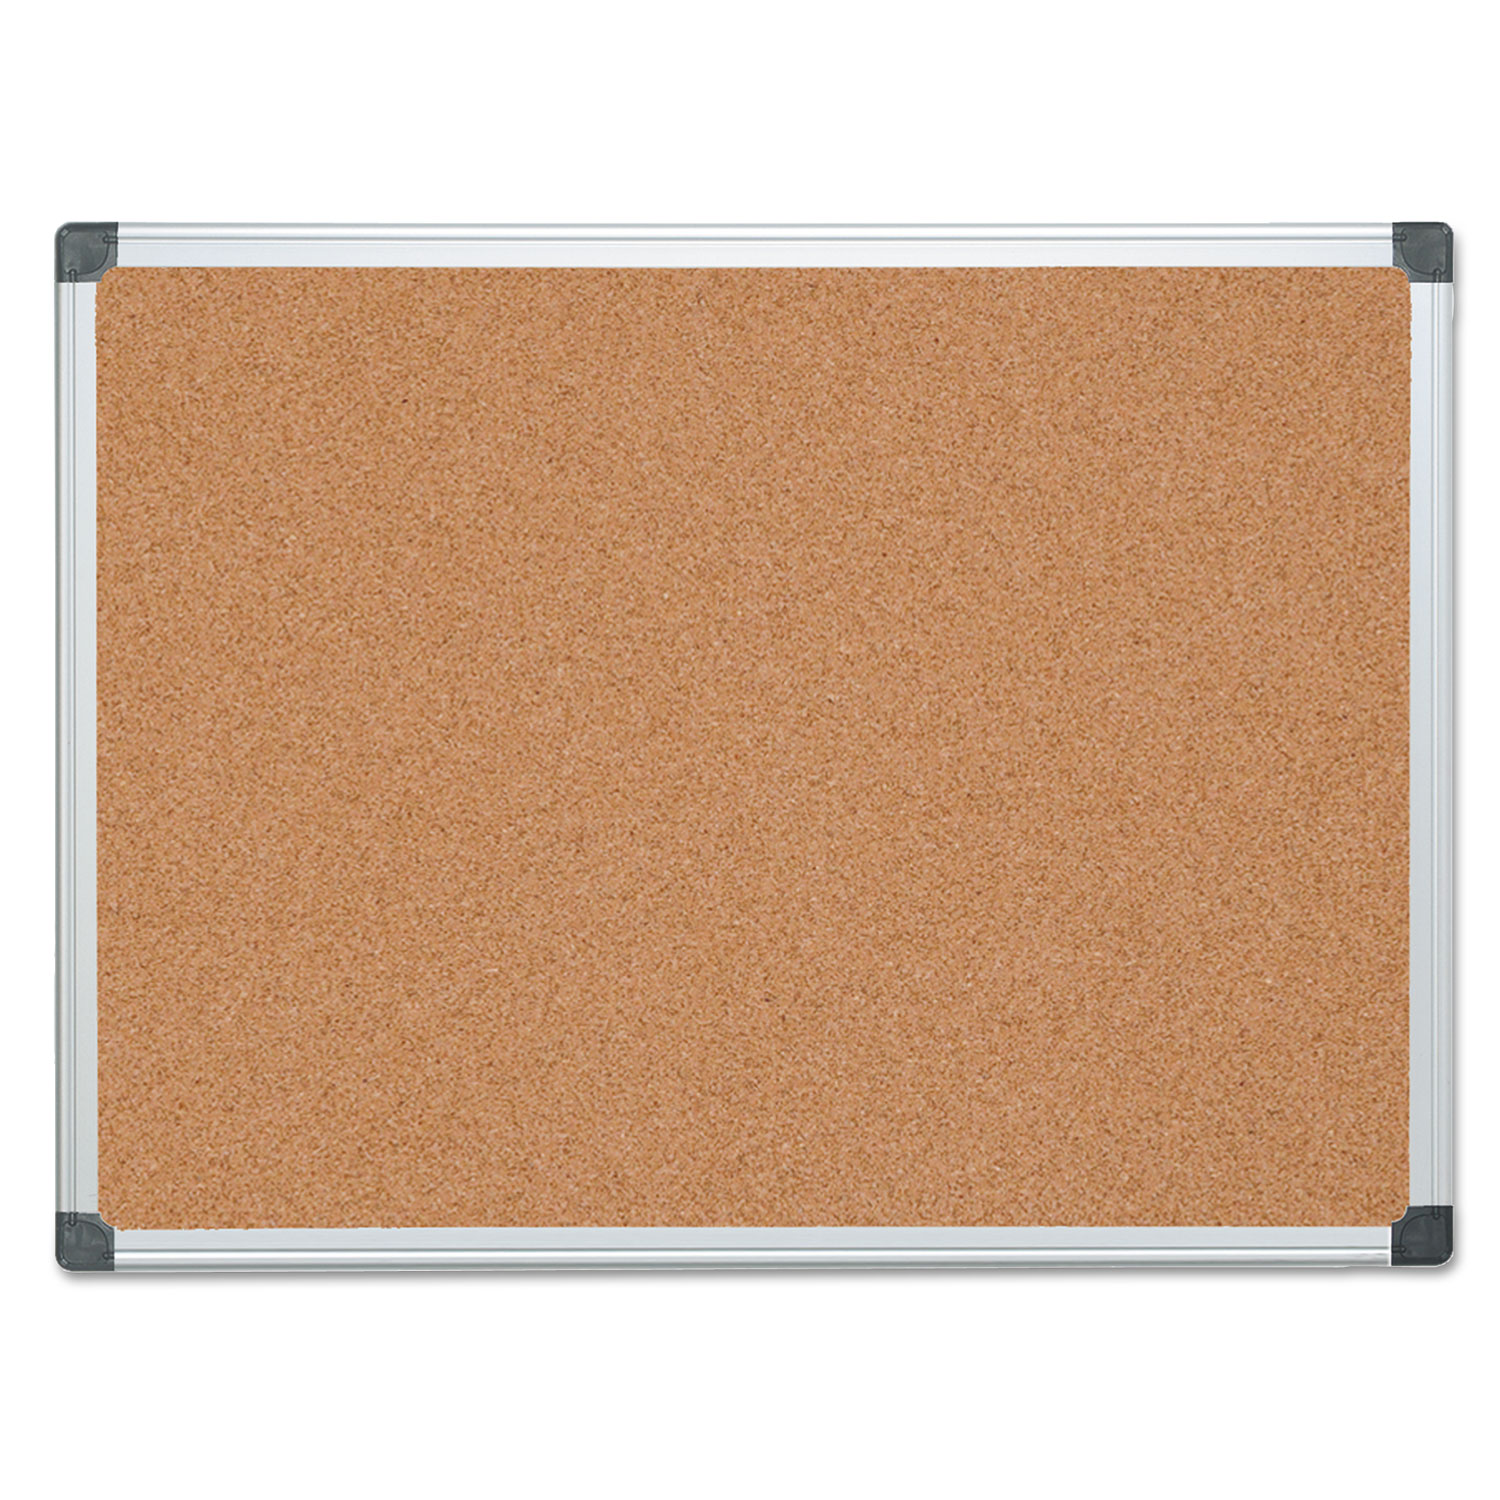  MasterVision CA051170 Value Cork Bulletin Board with Aluminum Frame, 36 x 48, Natural (BVCCA051170) 